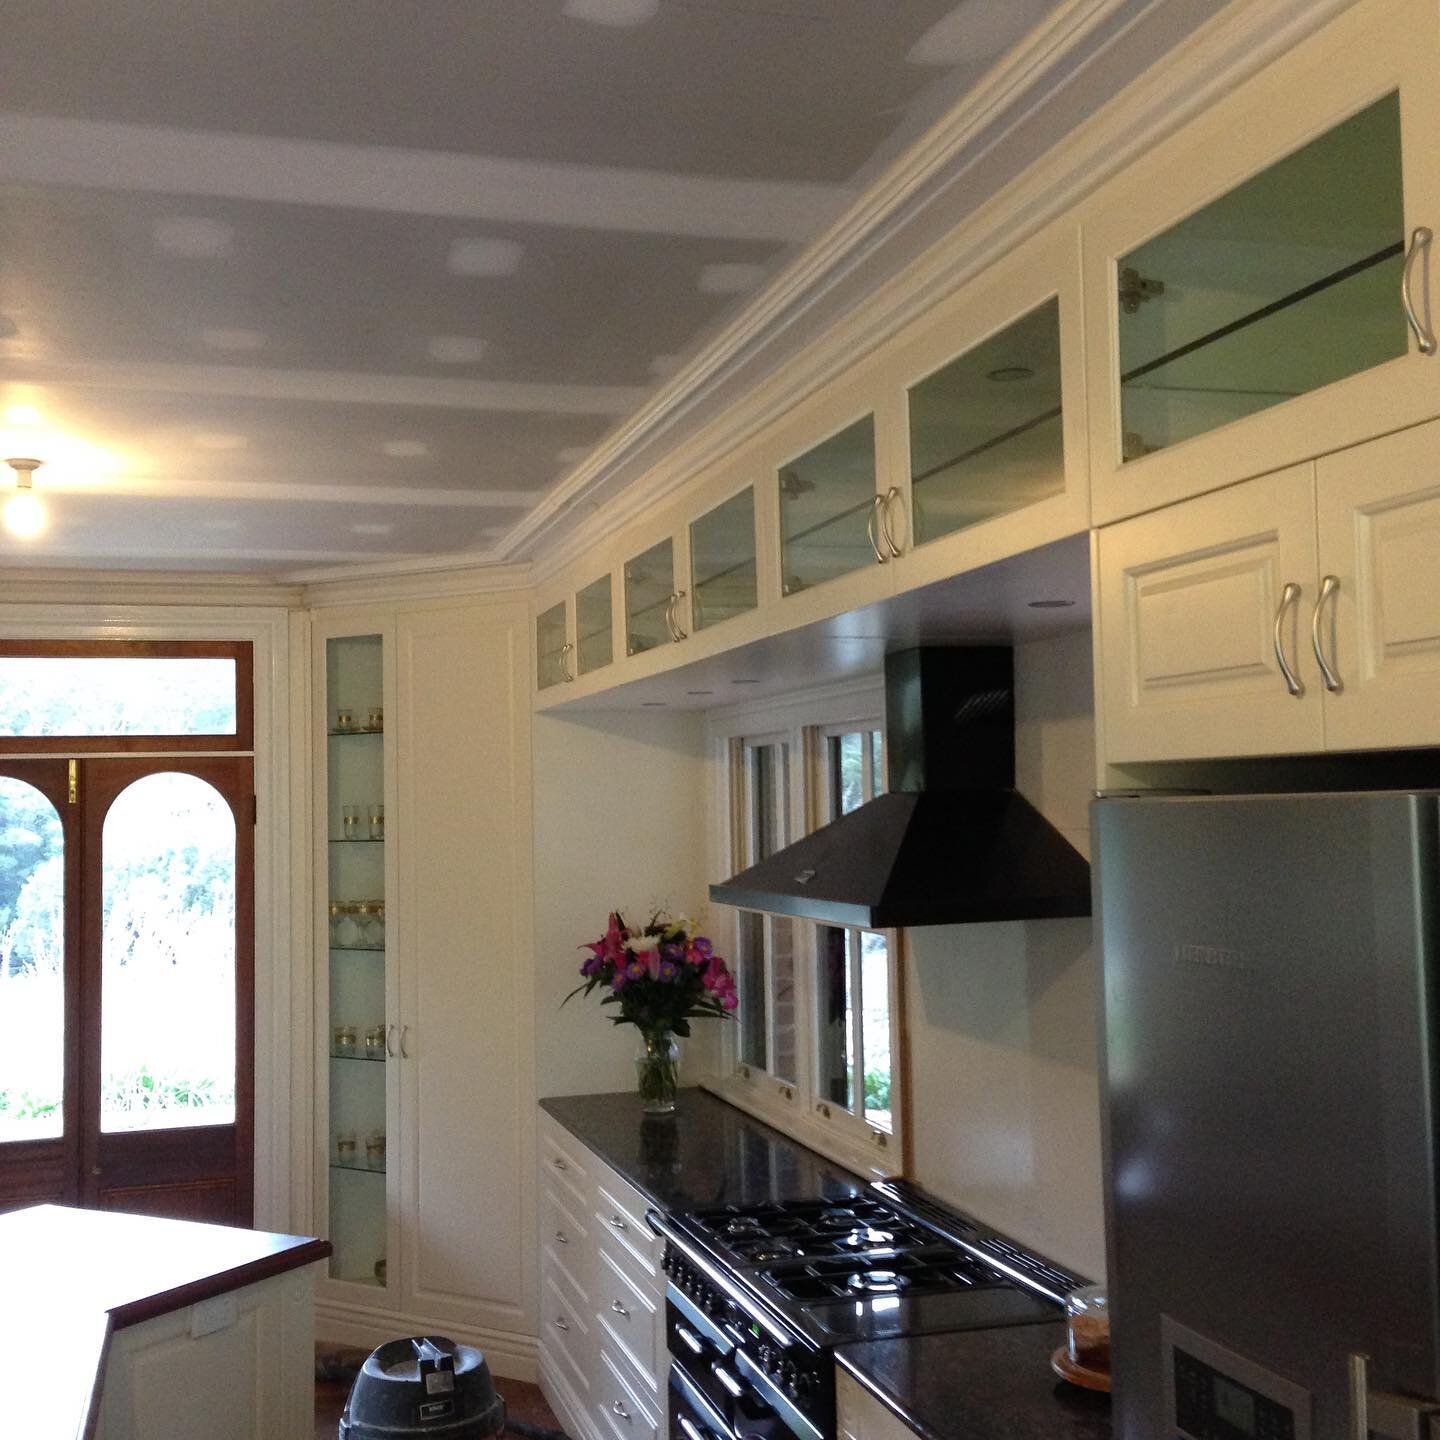 Ceiling replacement in Fountaindale.

Our clients opted for a decorative plaster cornice to finish off around their beautiful country kitchen.

We are really happy with how it came up. All cabinets, benchtop and floors are covered while work and the 